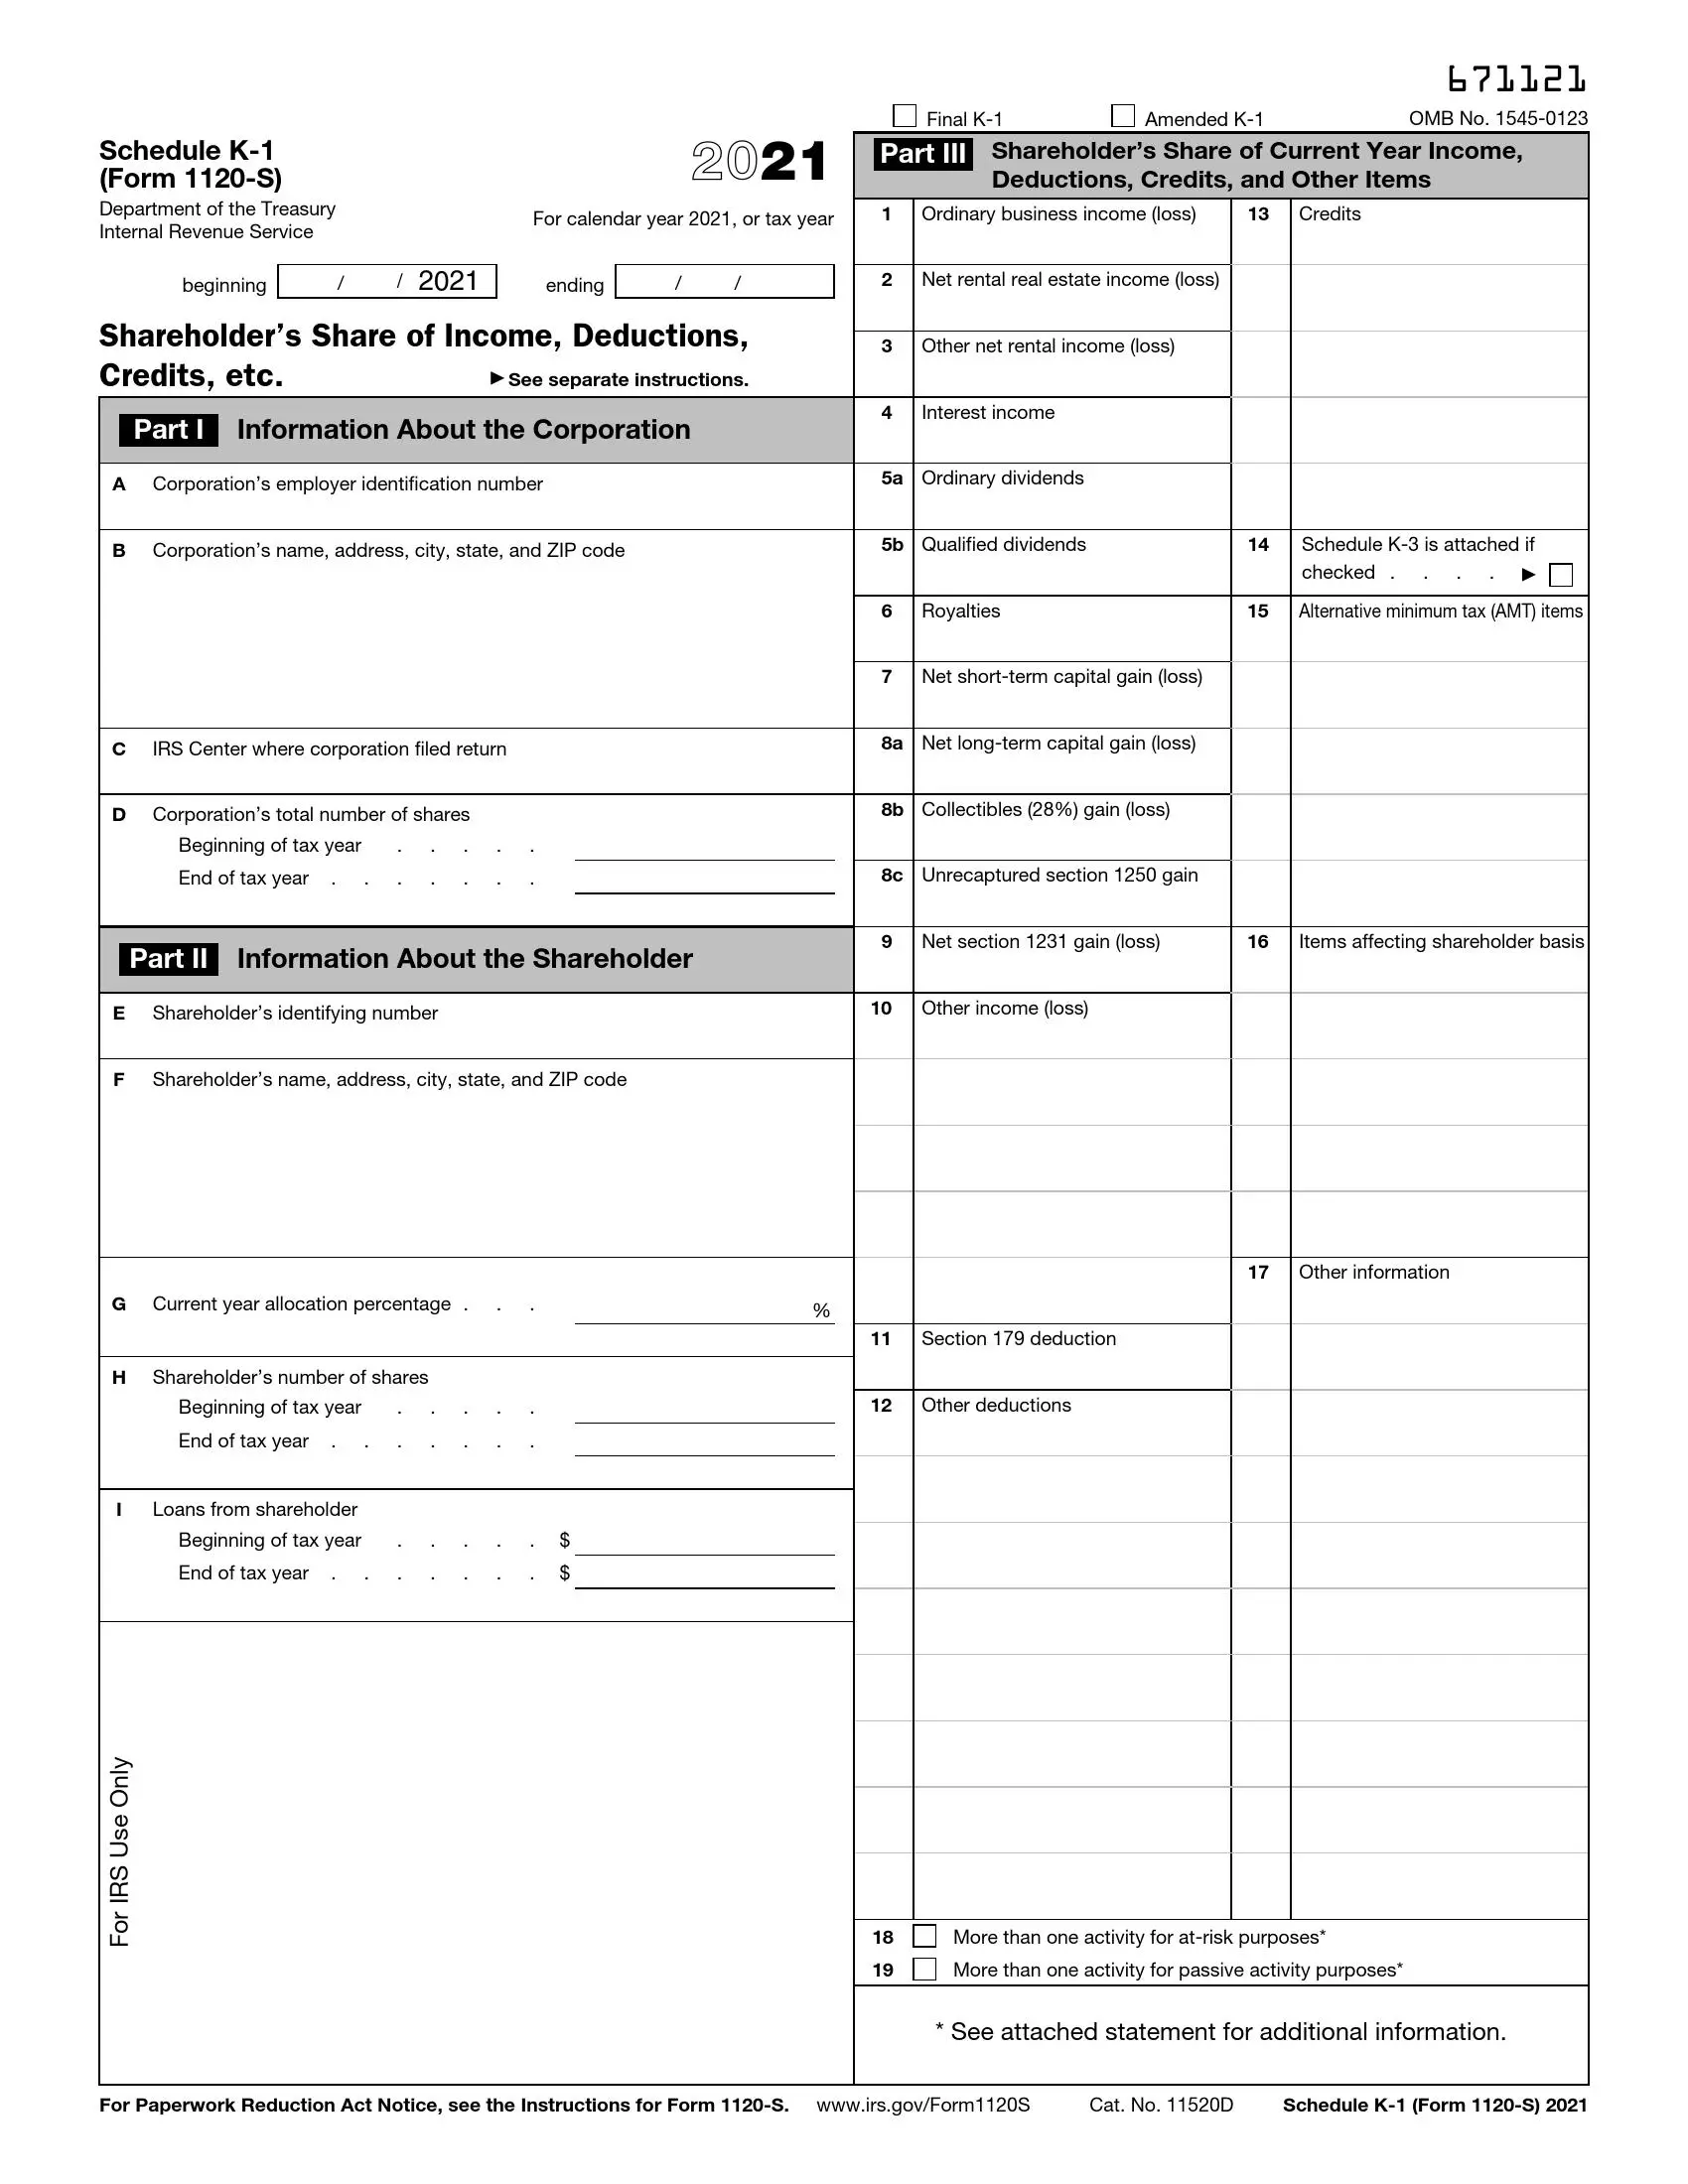 irs schedule k-1 form 1120-s 2021 preview